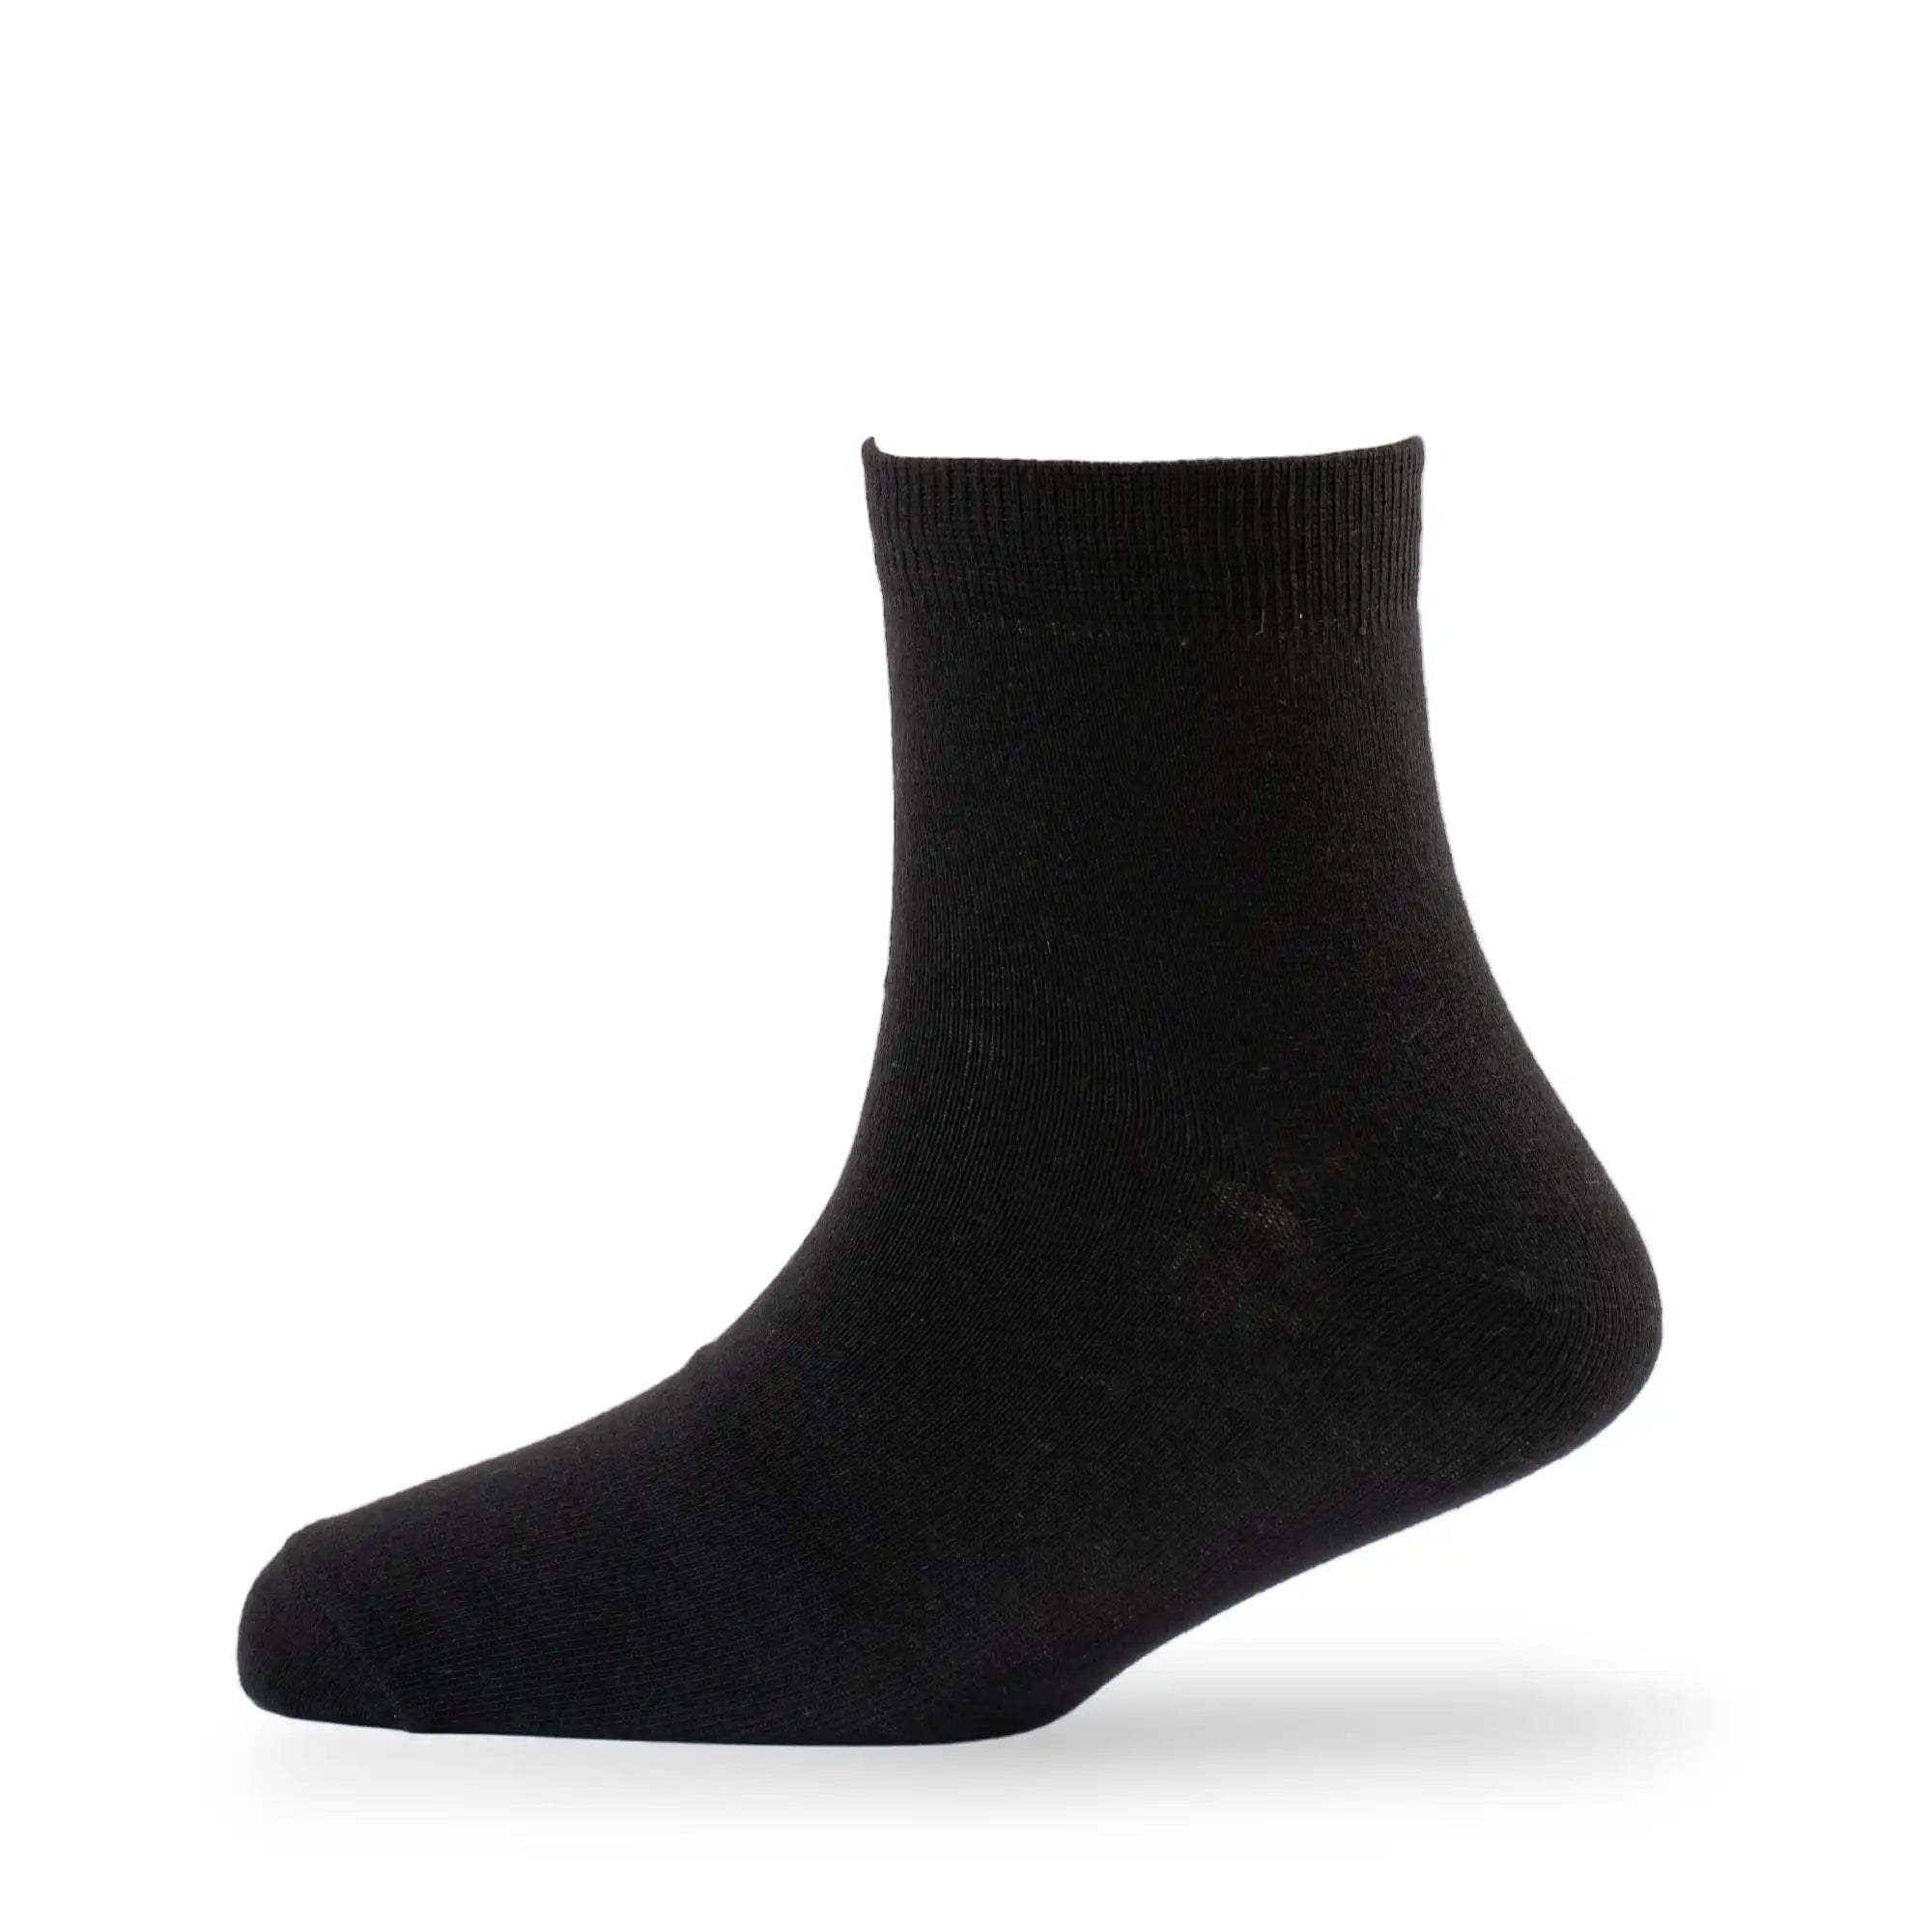 Young Wings Men's Black Colour Cotton Fabric Solid Ankle Length Socks - Pack of 5, Style no. M1-224